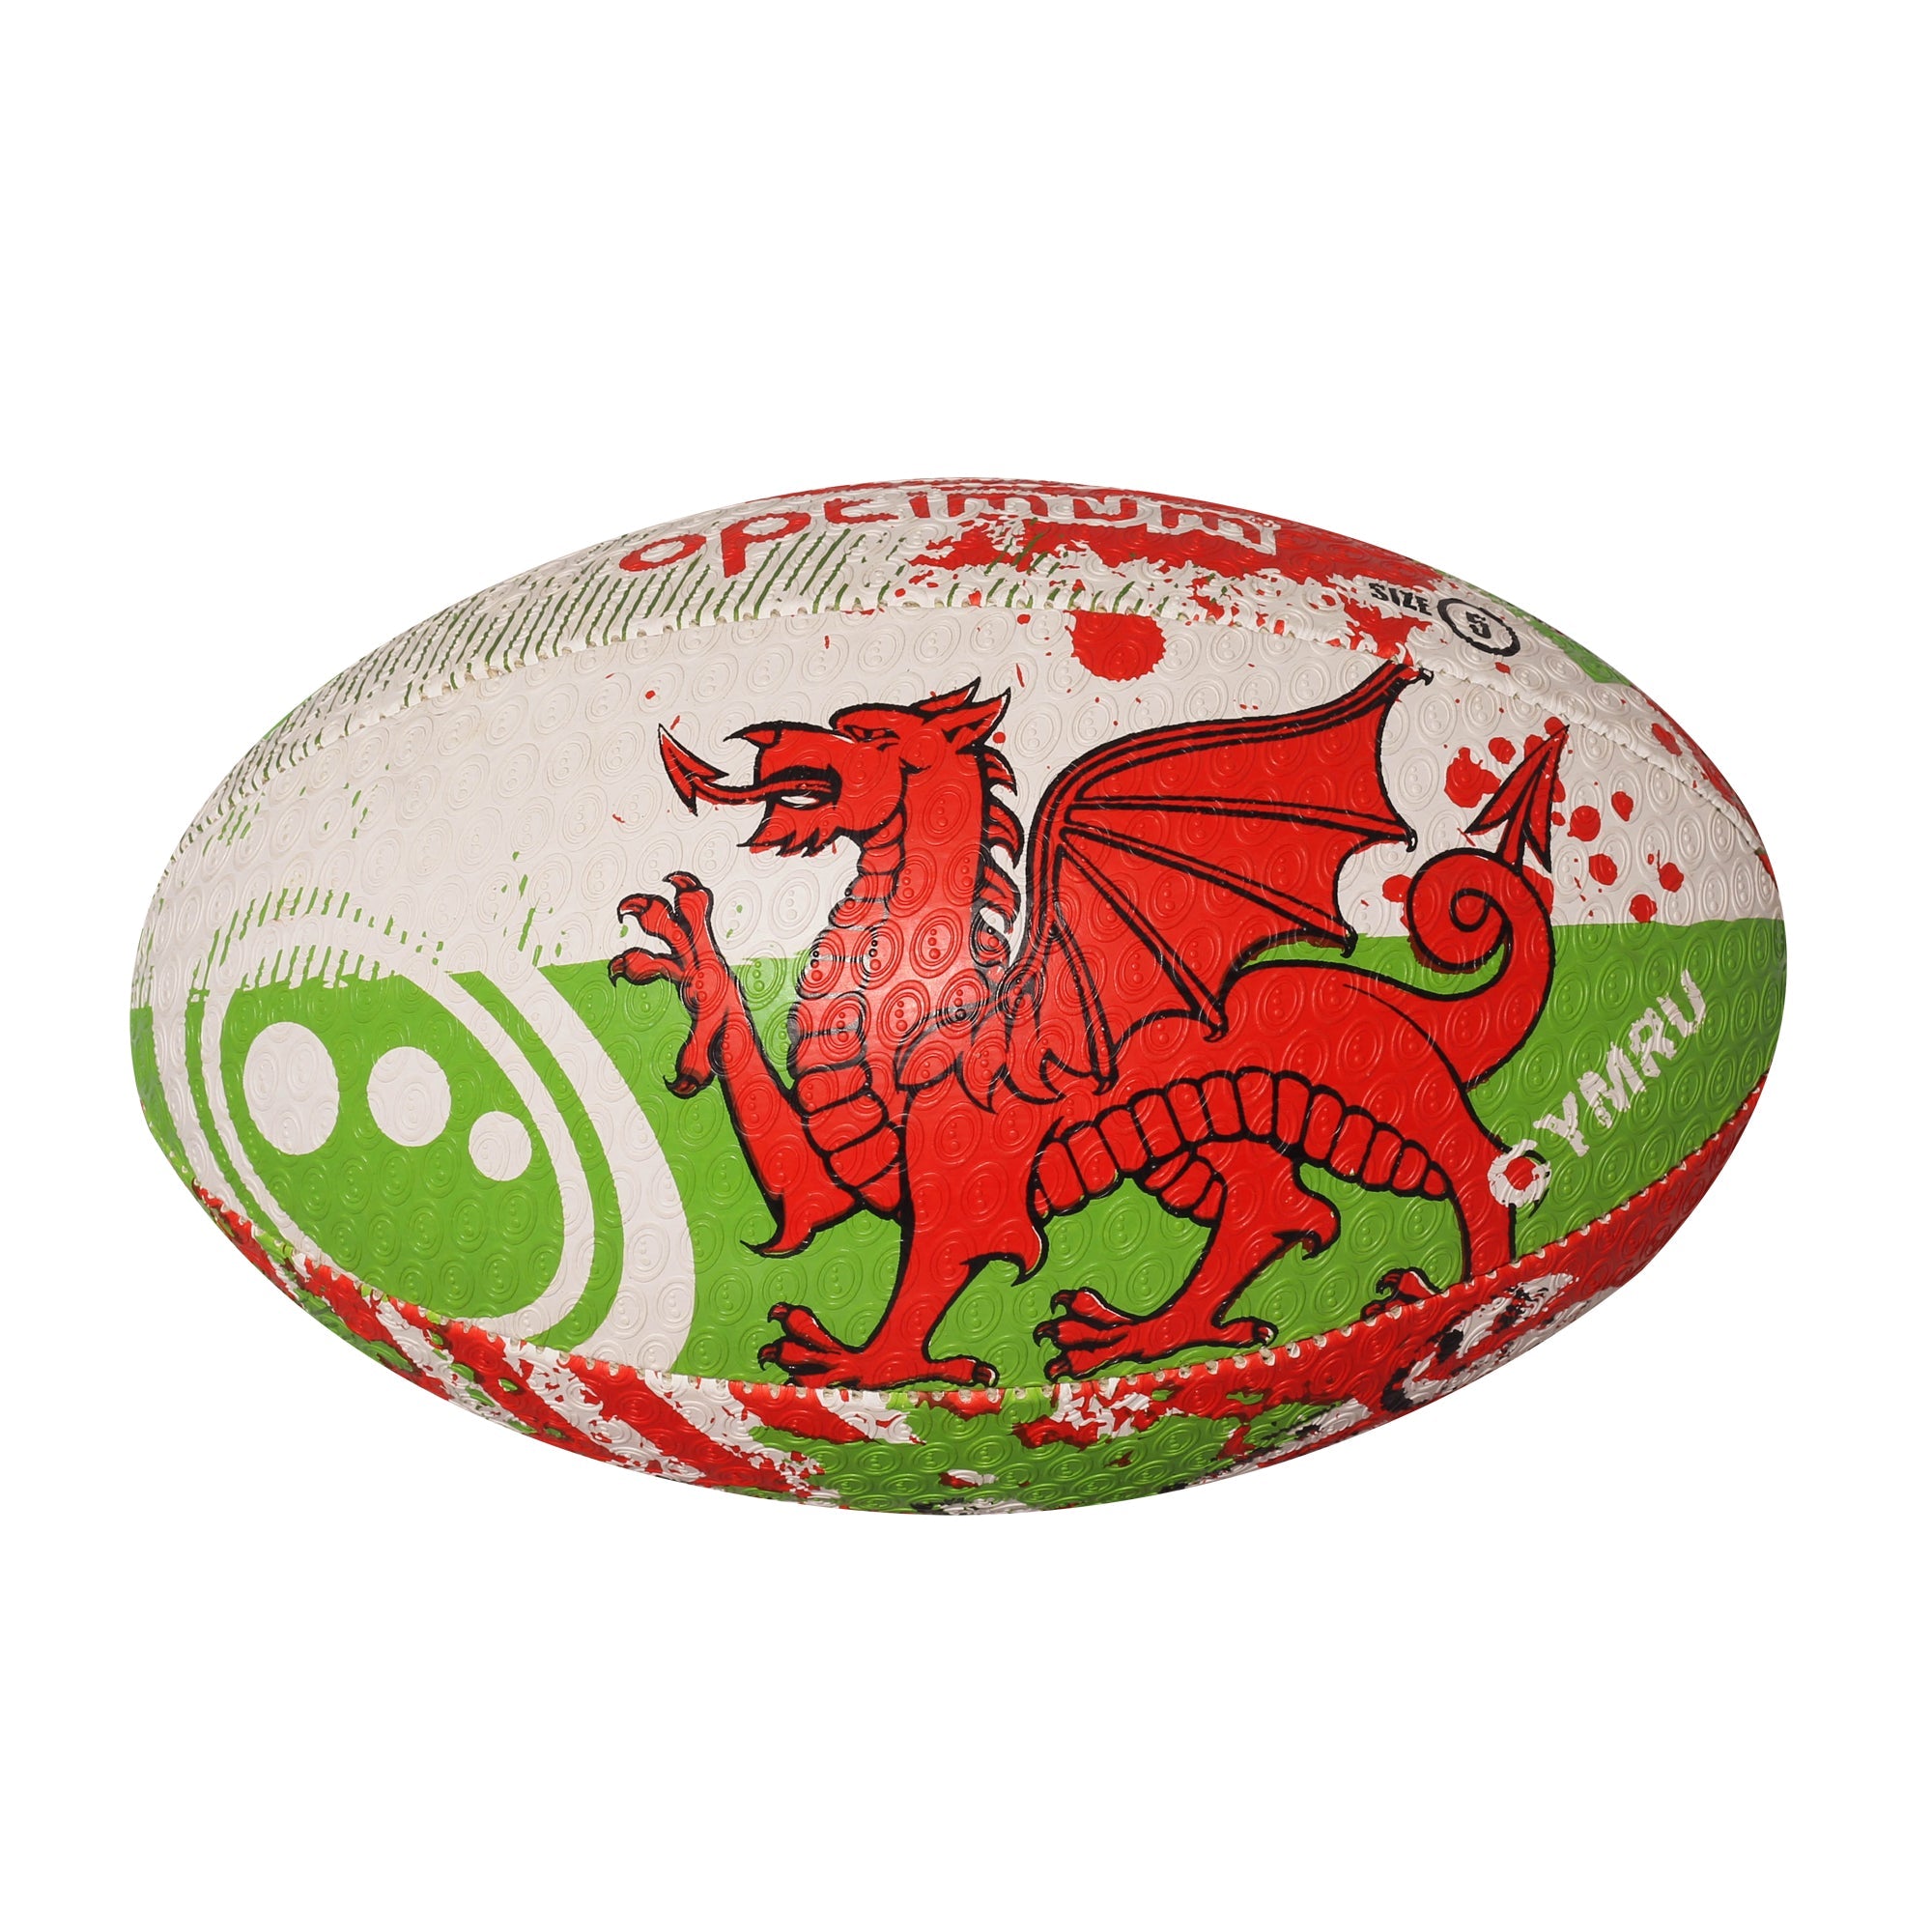 Nations Rugby Ball - Optimum